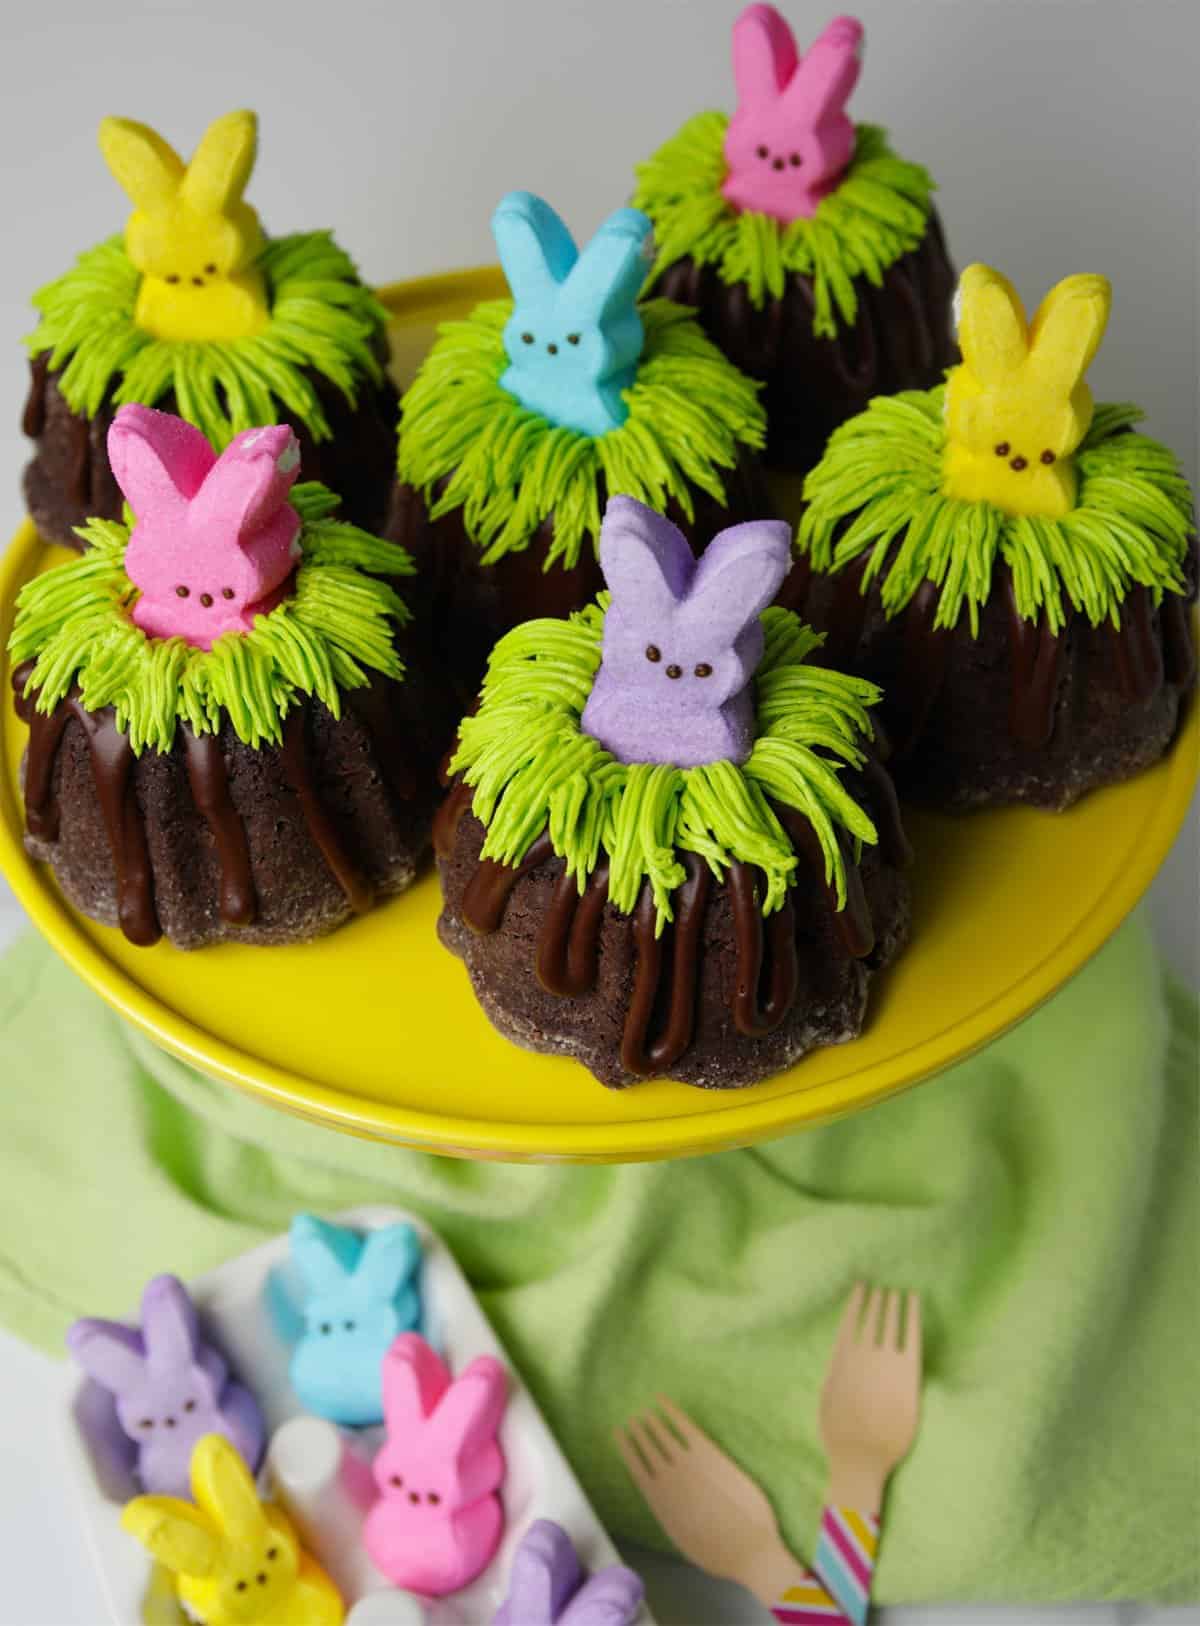 Mini chocolate Bundt cakes with green buttercream grass and Peeps on top.